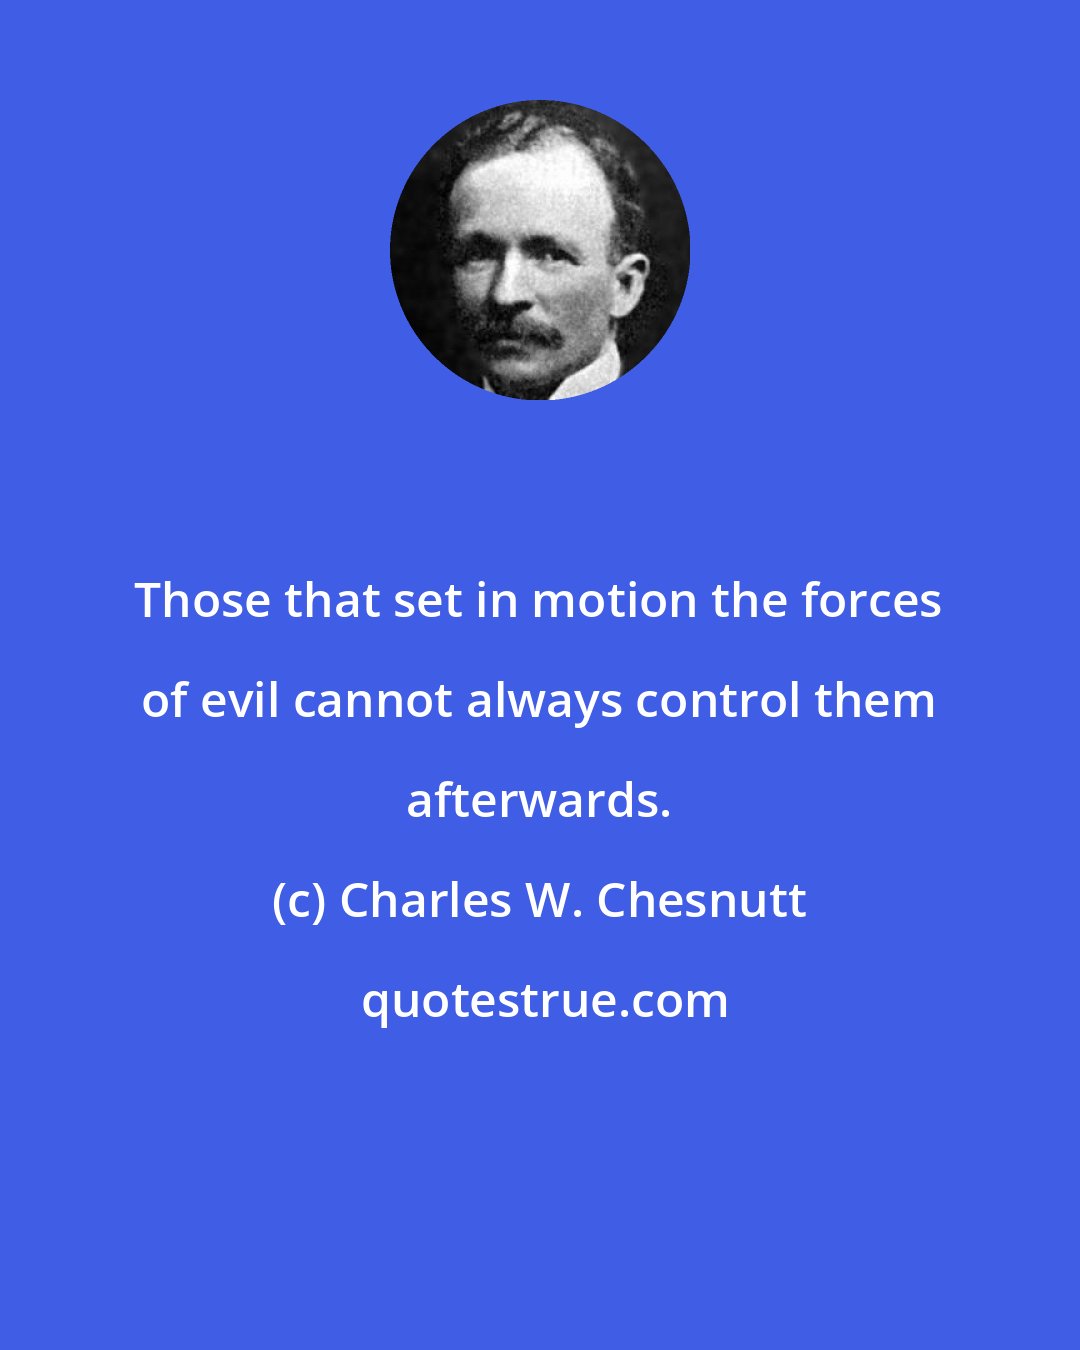 Charles W. Chesnutt: Those that set in motion the forces of evil cannot always control them afterwards.